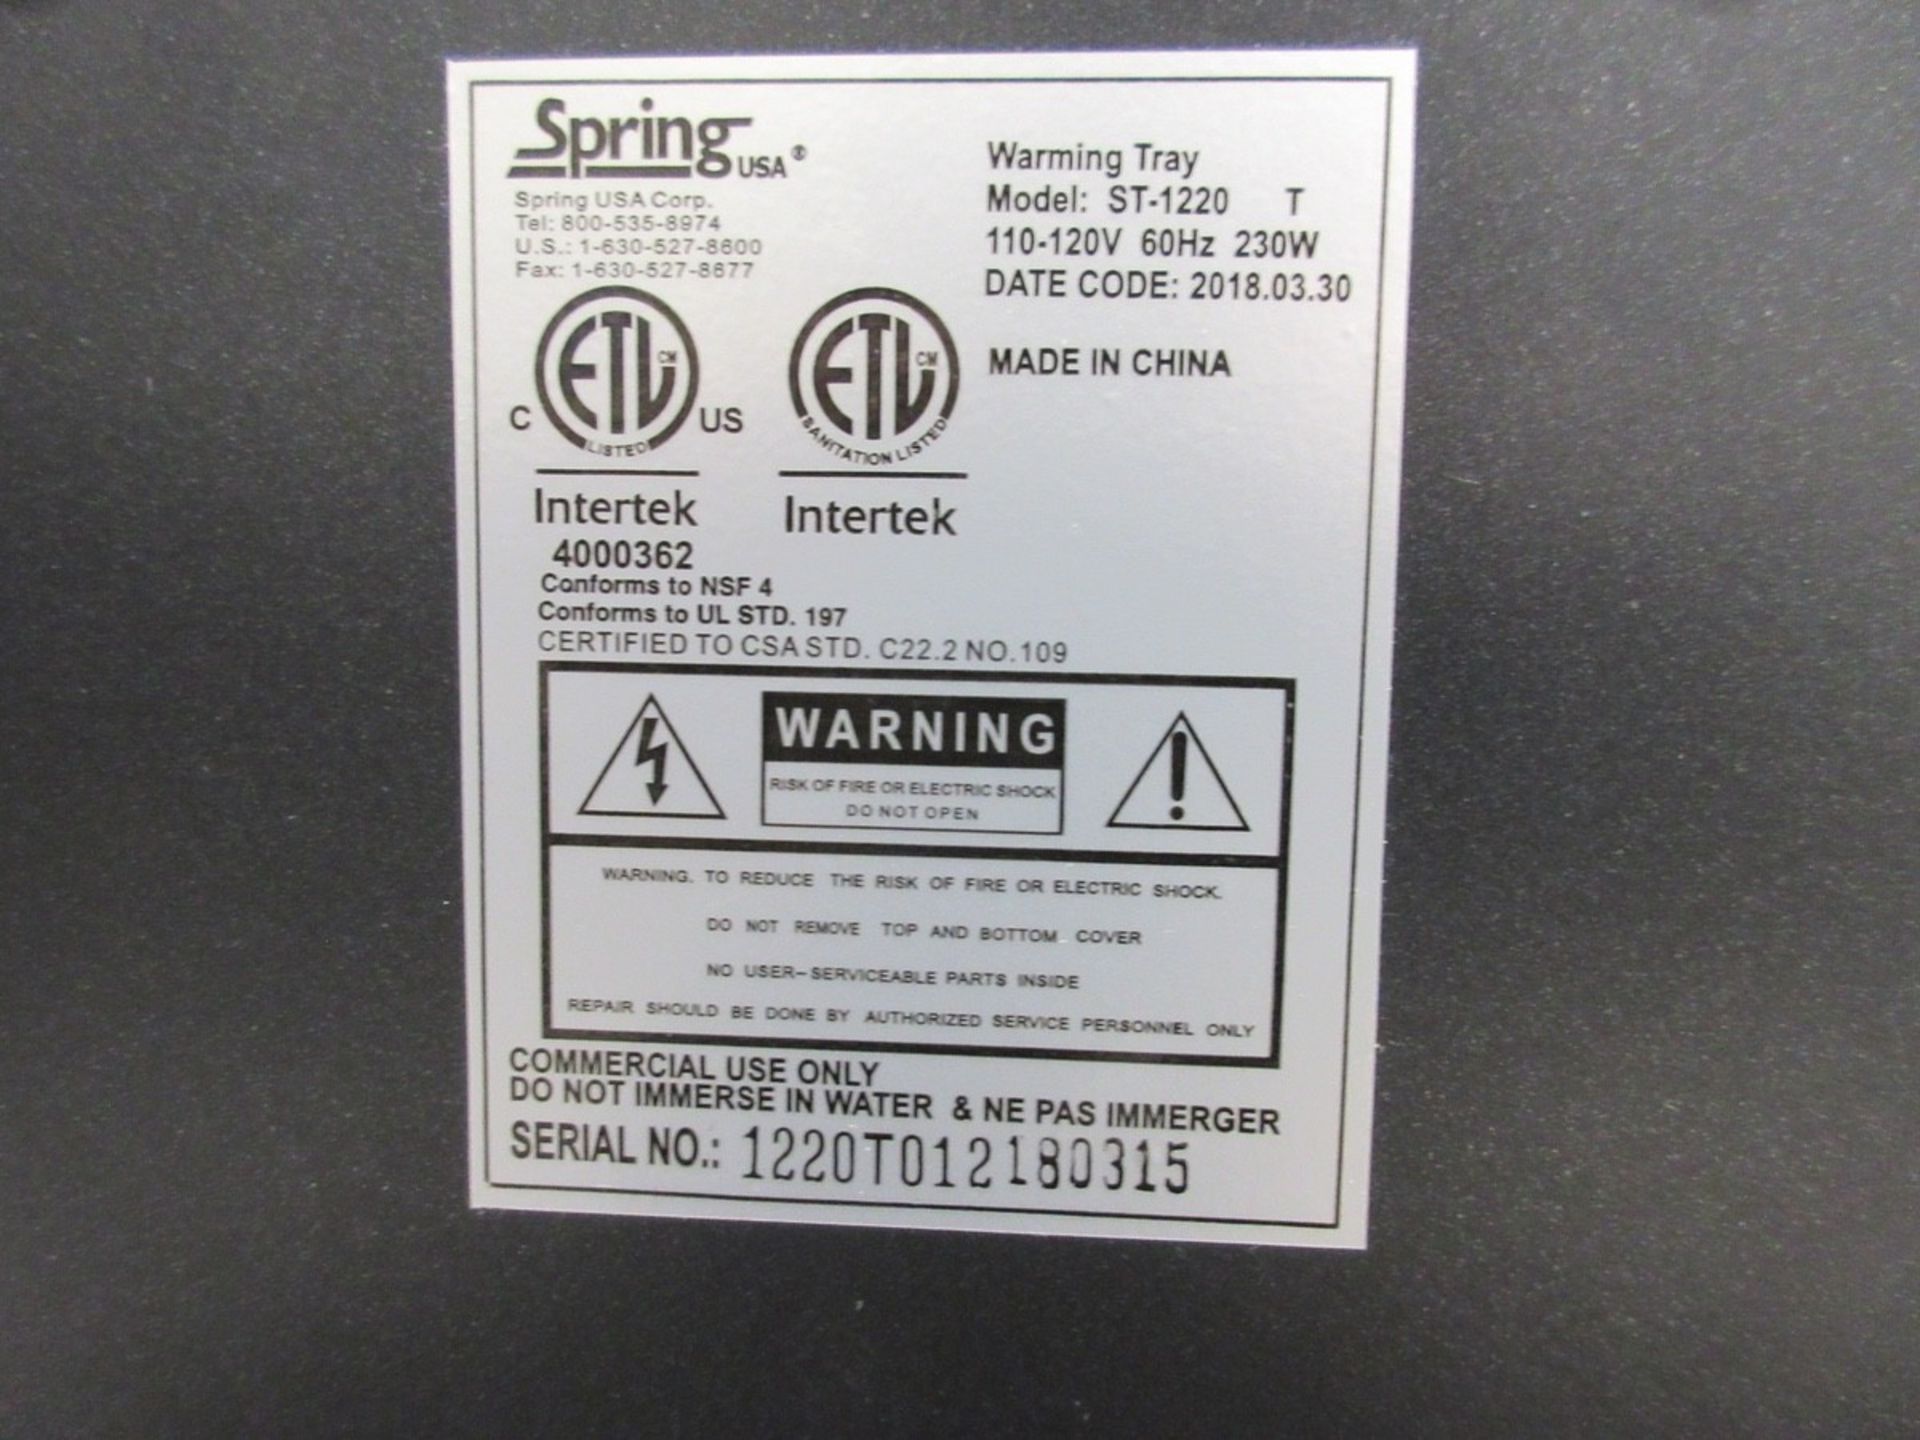 LOT (2) Spring USA Model ST-1220 Warming Trays - Image 3 of 3